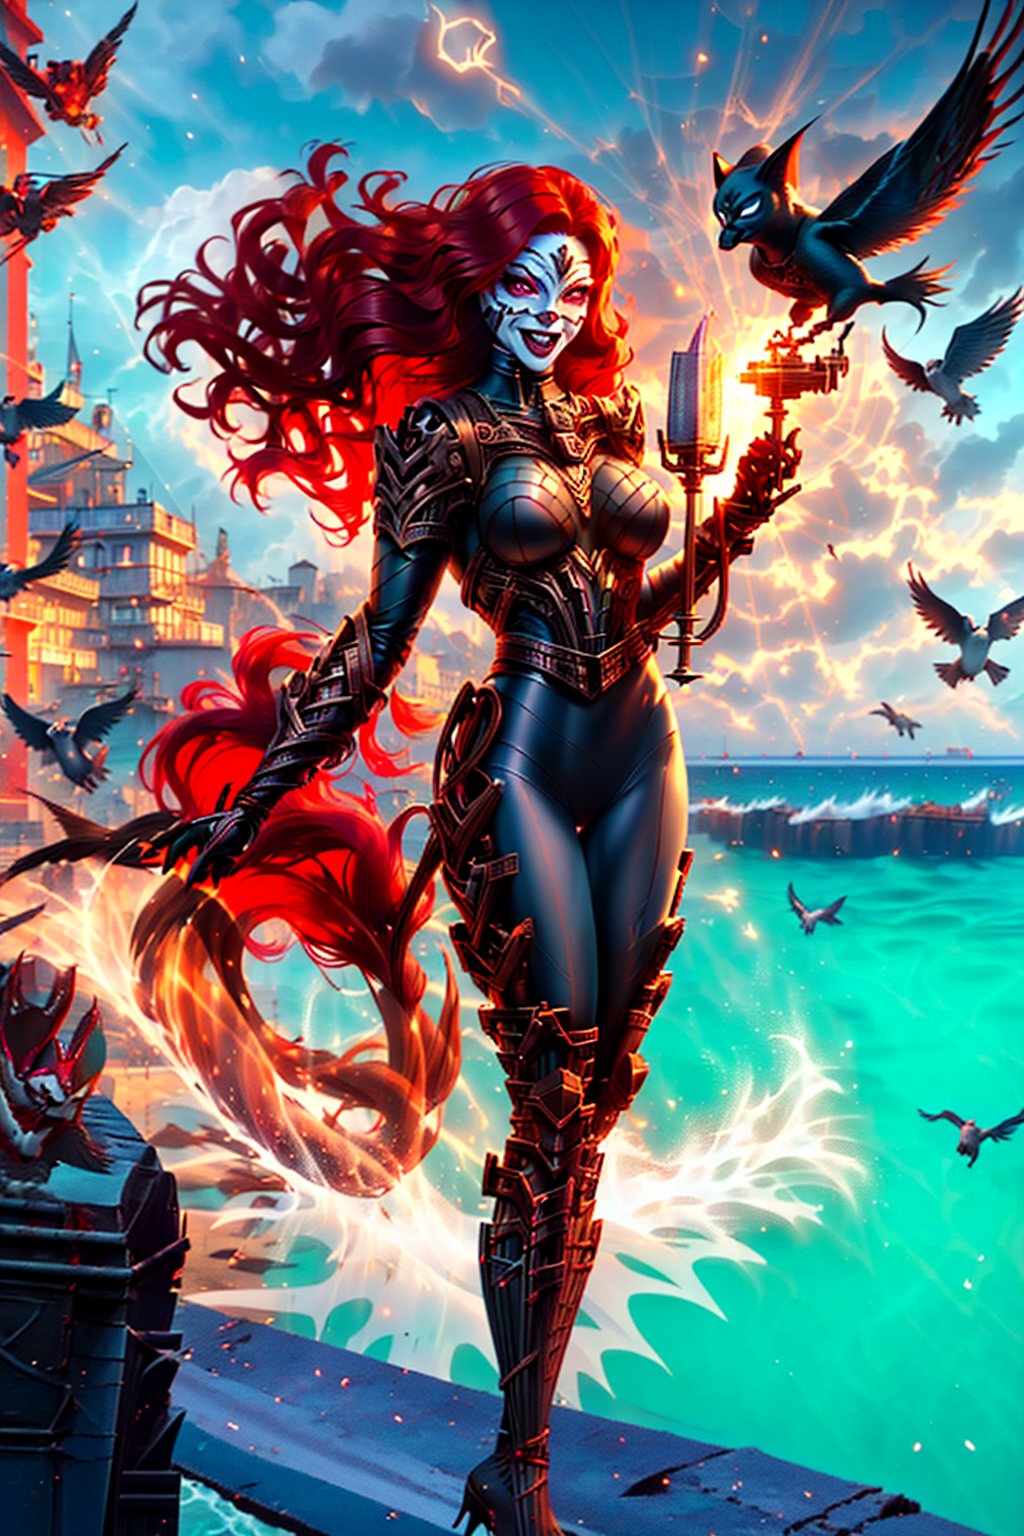 A light-skinned European woman with long red hair, wearing a Catwoman-like mask covering her upper face, holding a huge hammer with a black and red handle, standing on the seaside in Italy, laughing and blowing Breathing the sea breeze, surrounded by birds and fish jumping out of the sea